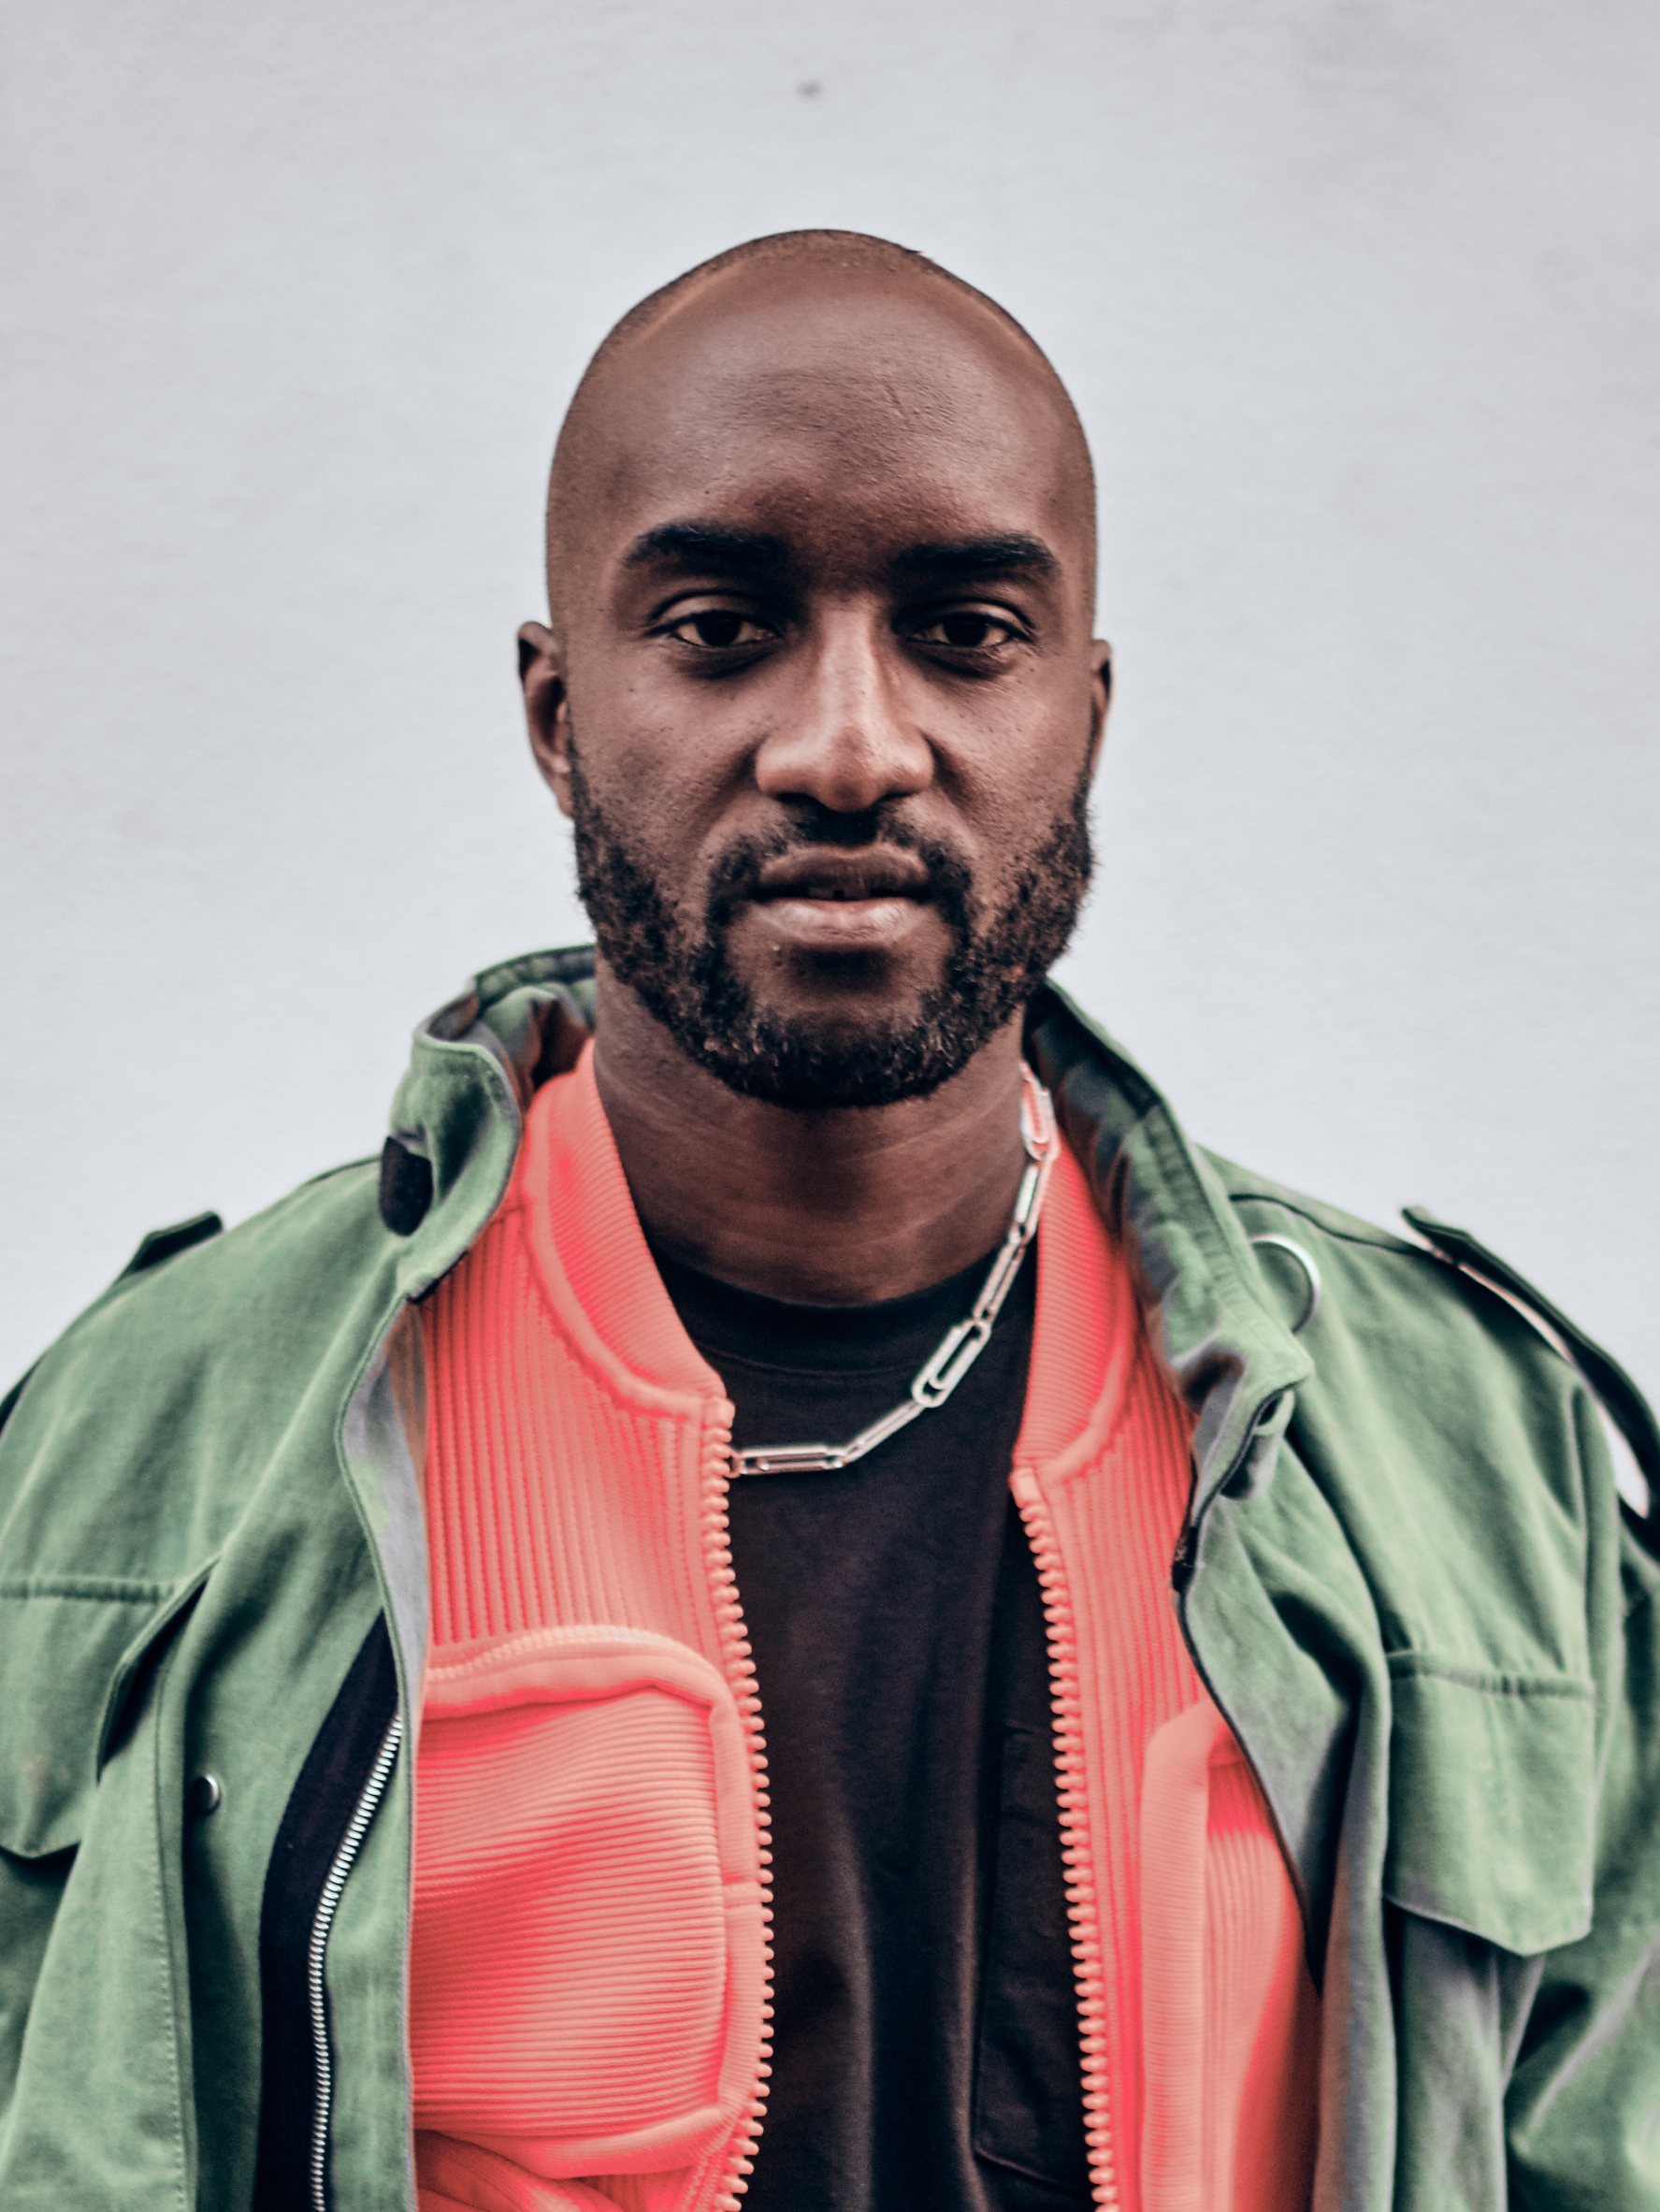 Virgil Abloh – The world of fashion and entertainment mourns his death